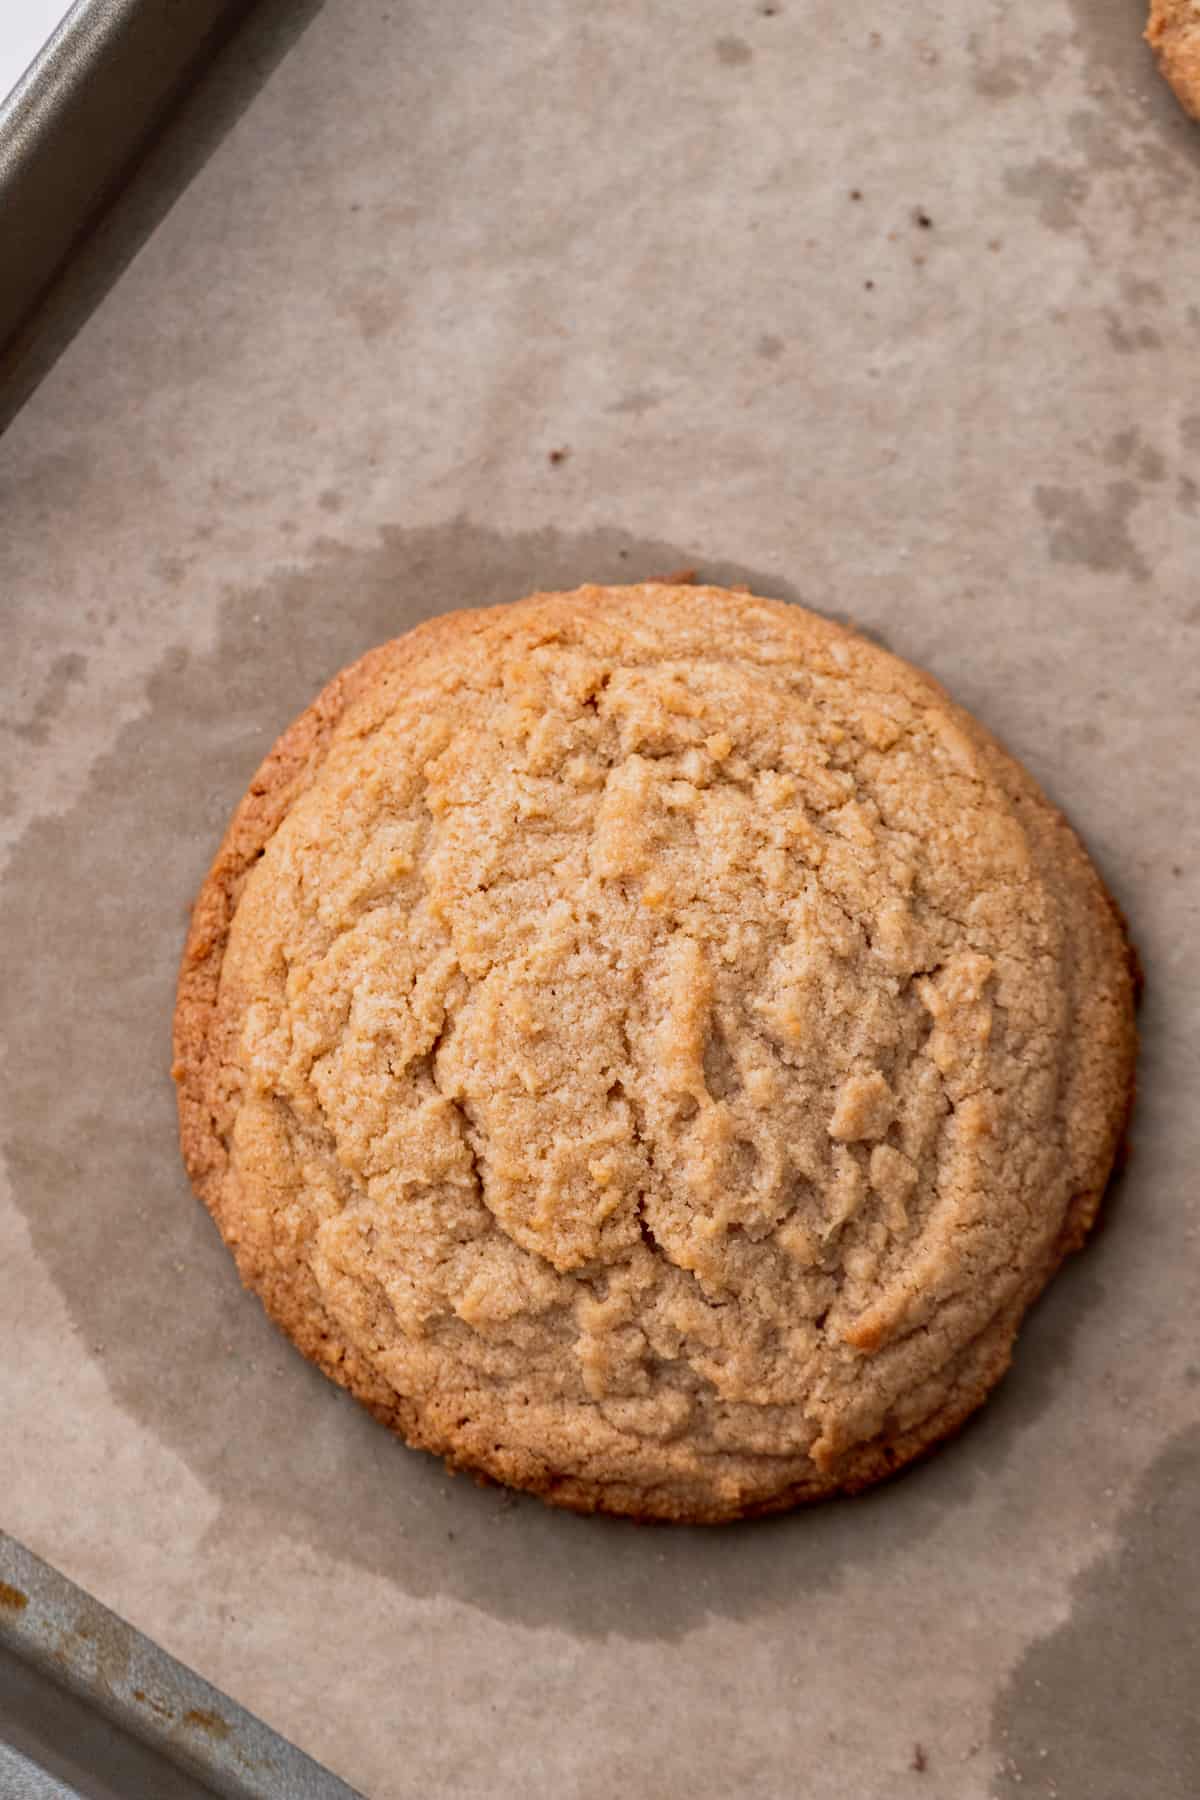 Peanut butter cookie baked on a cookie sheet.